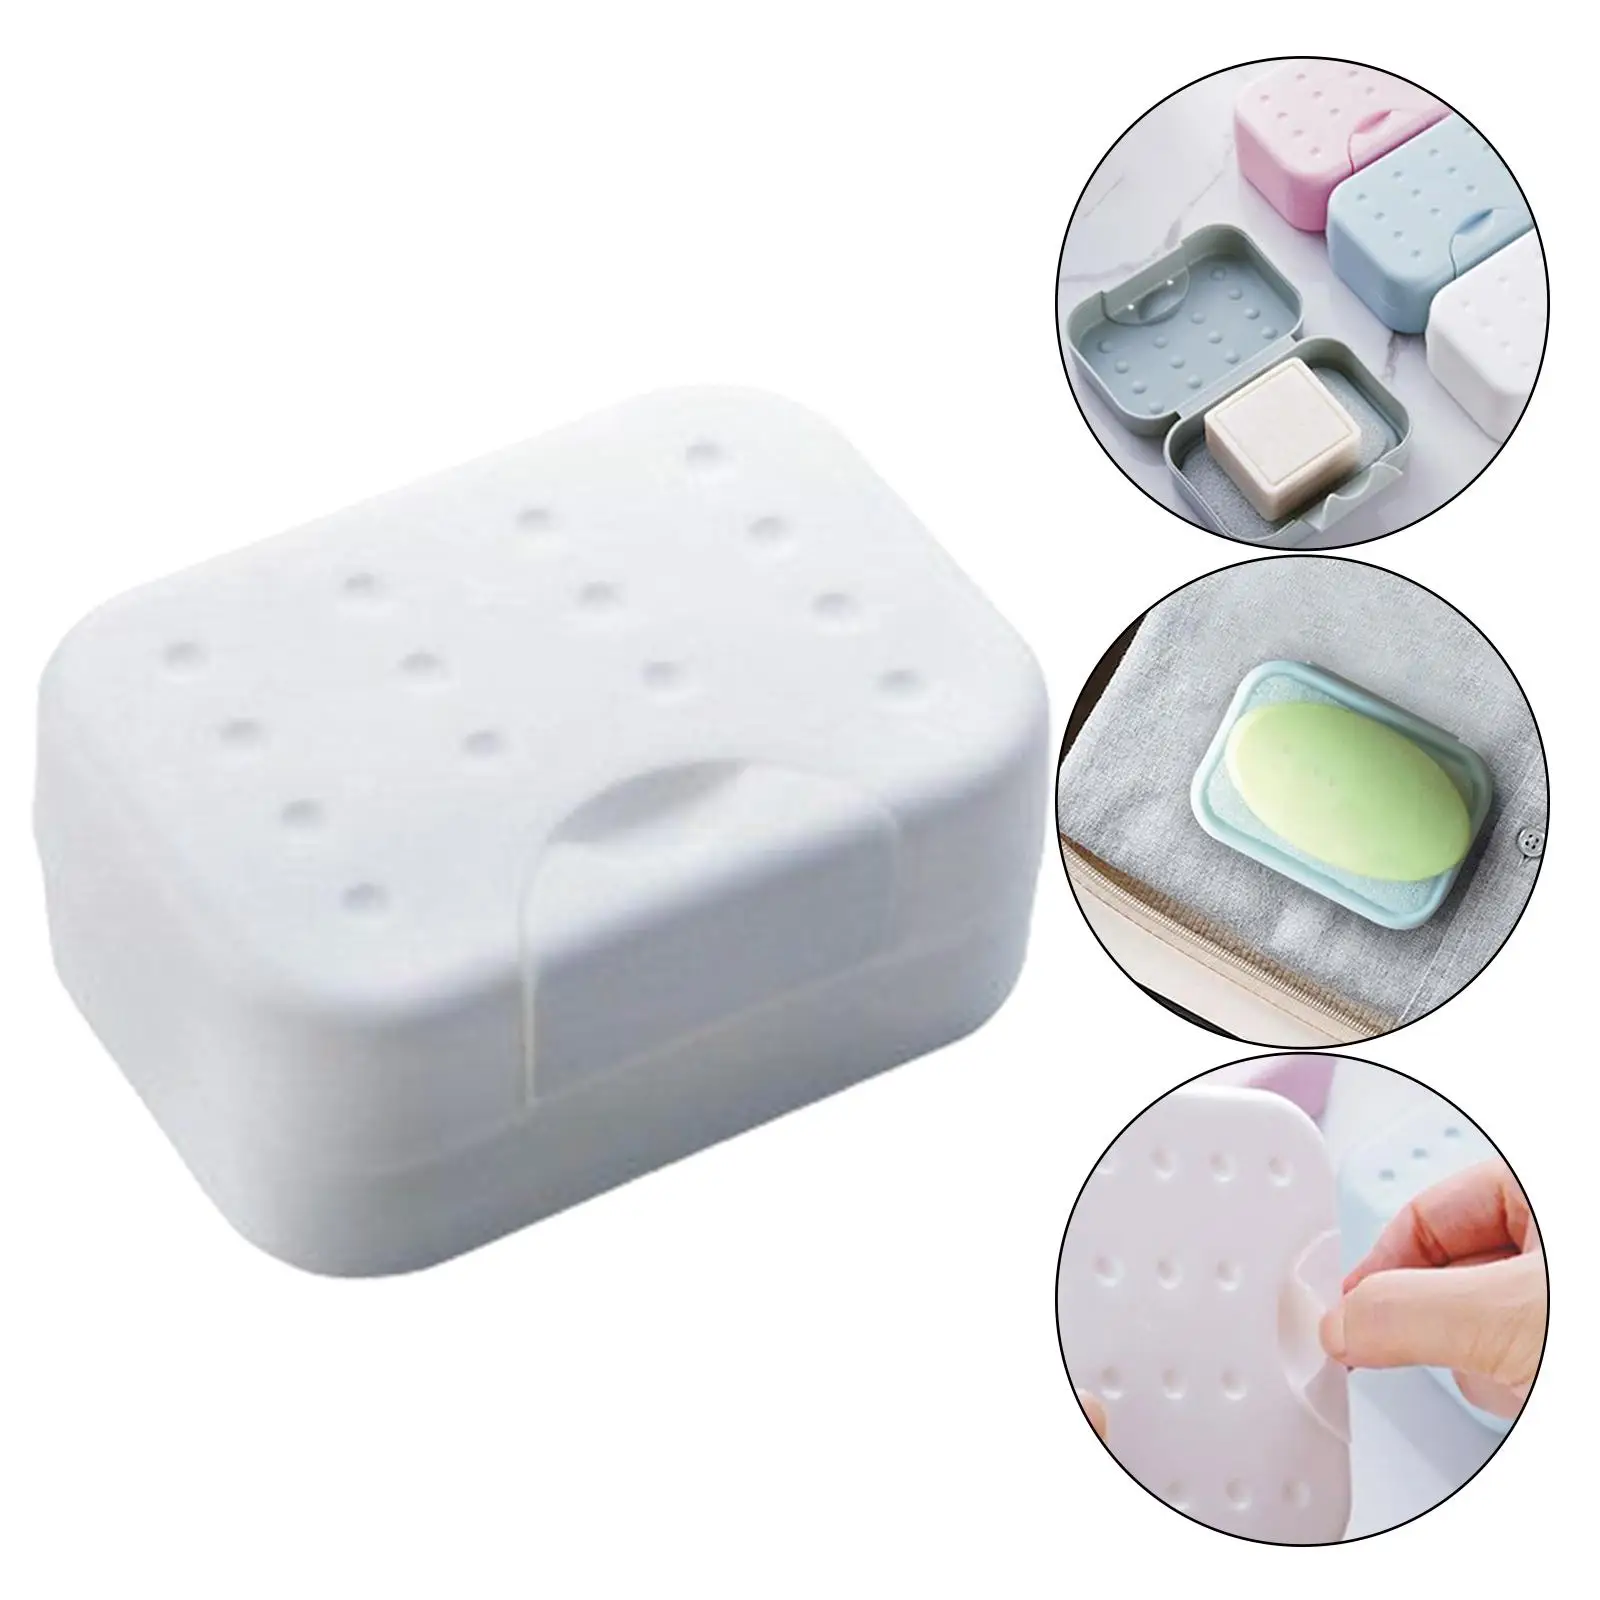 Portable Travel Soap Box Case Dish Container Soap Bar Holder for Hiking Bathroom Gym with Sponge Saver Sealed Waterproof